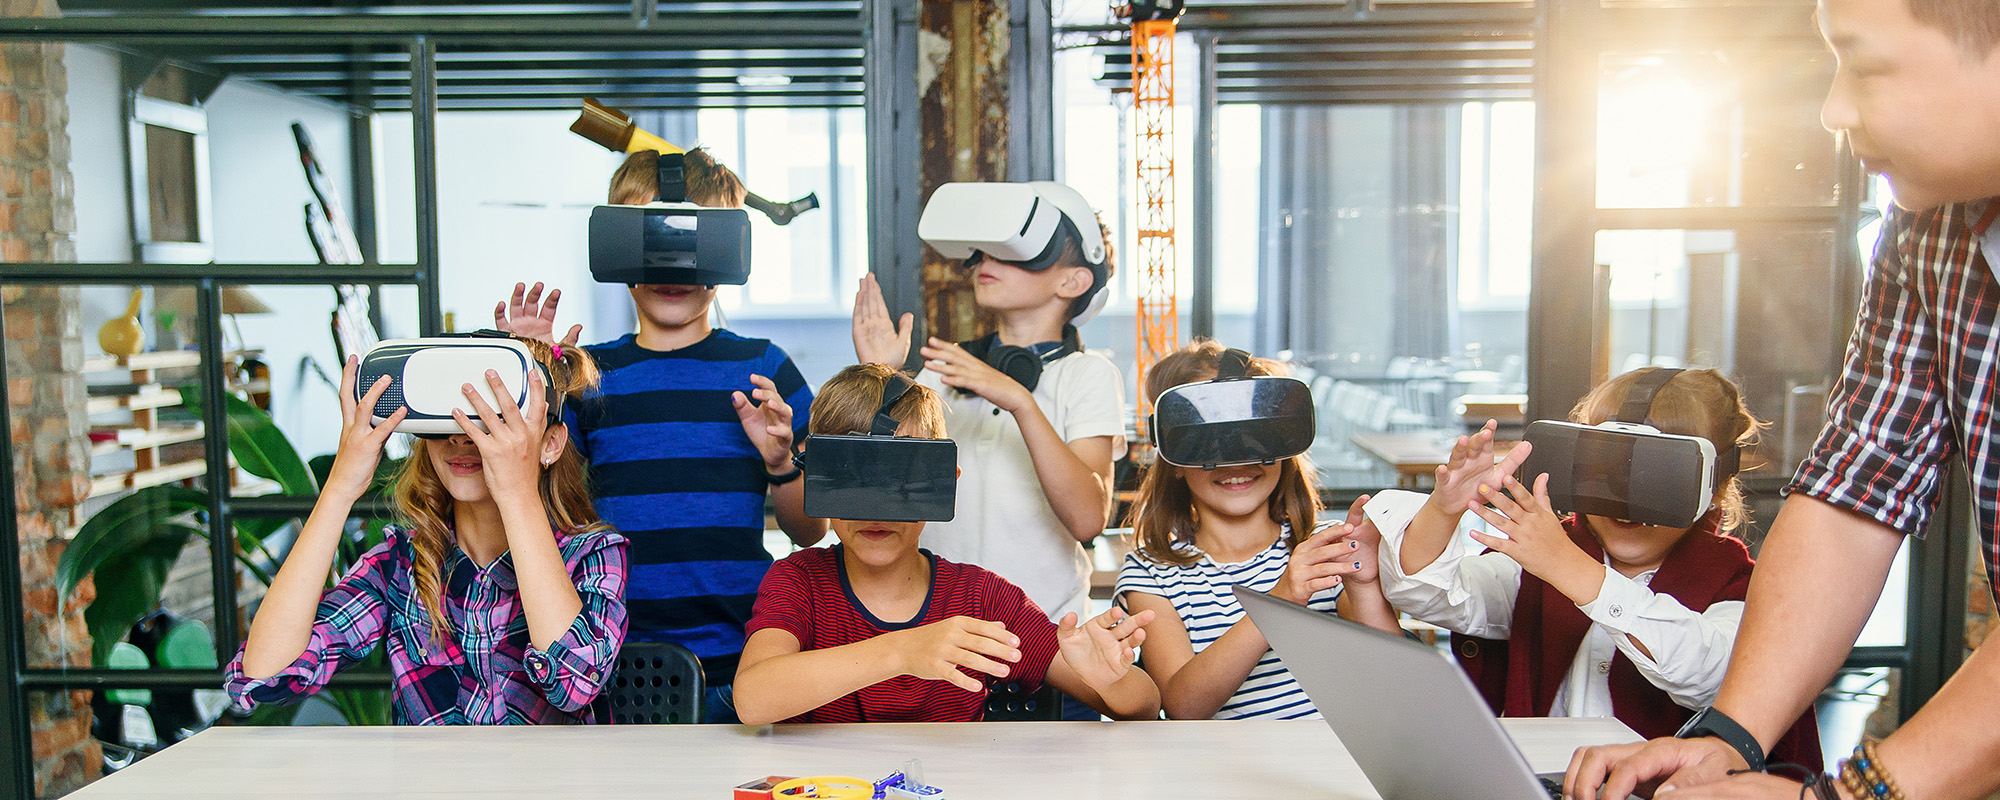 children using VR headsets in a classroom